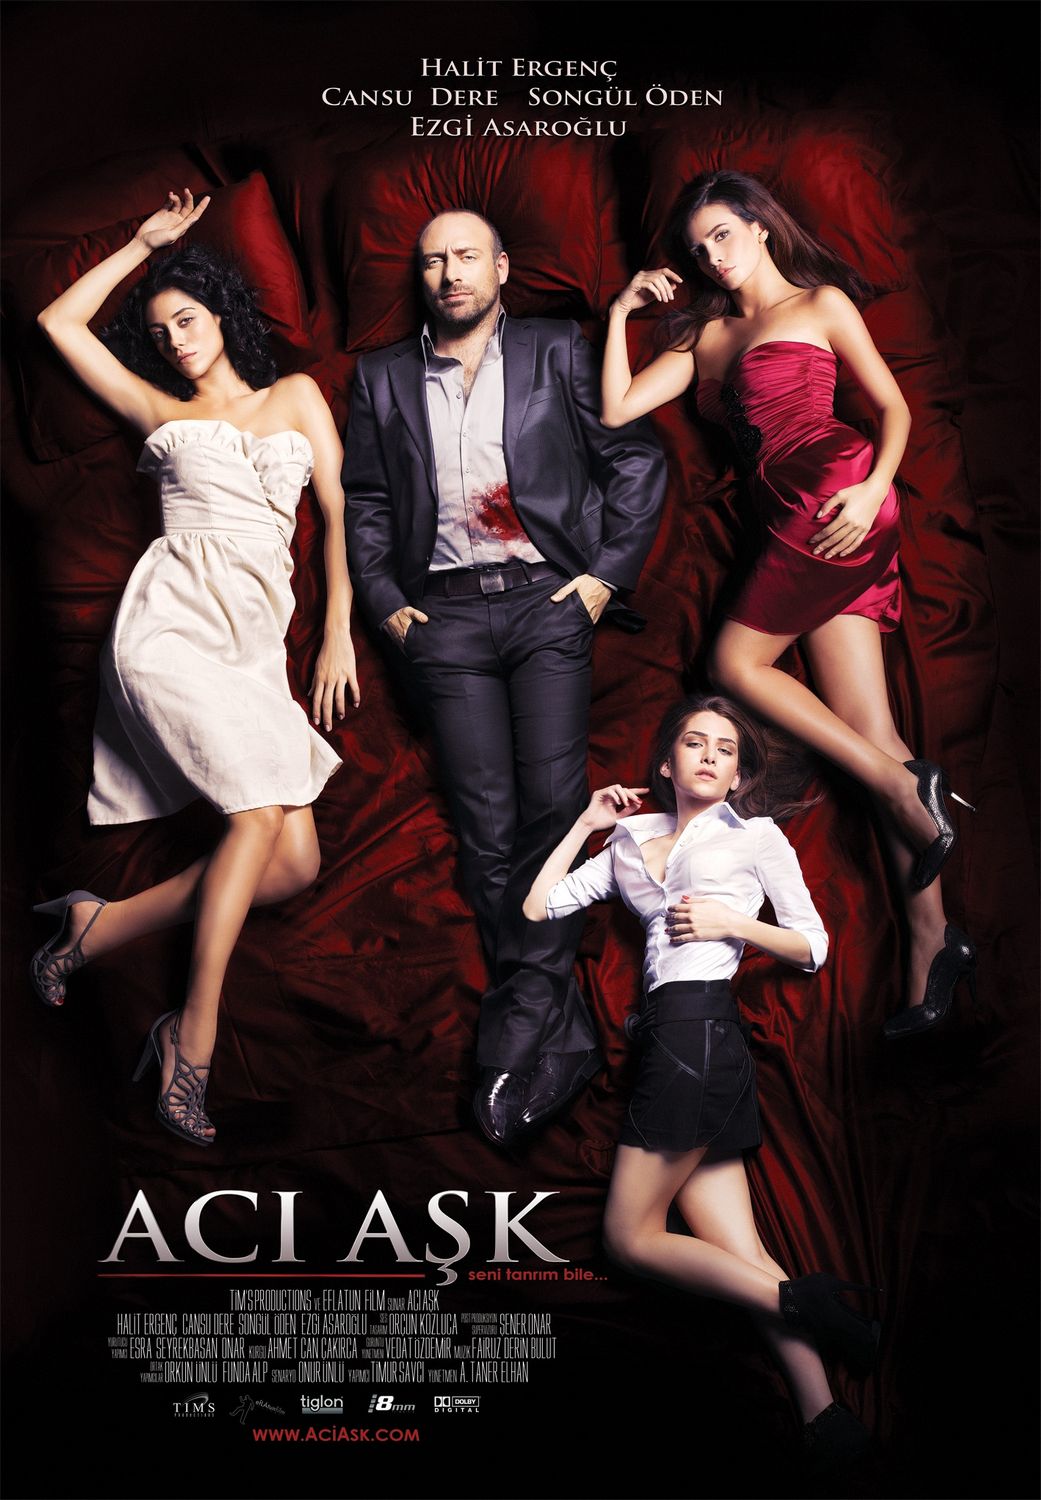 Extra Large Movie Poster Image for Aci ask 